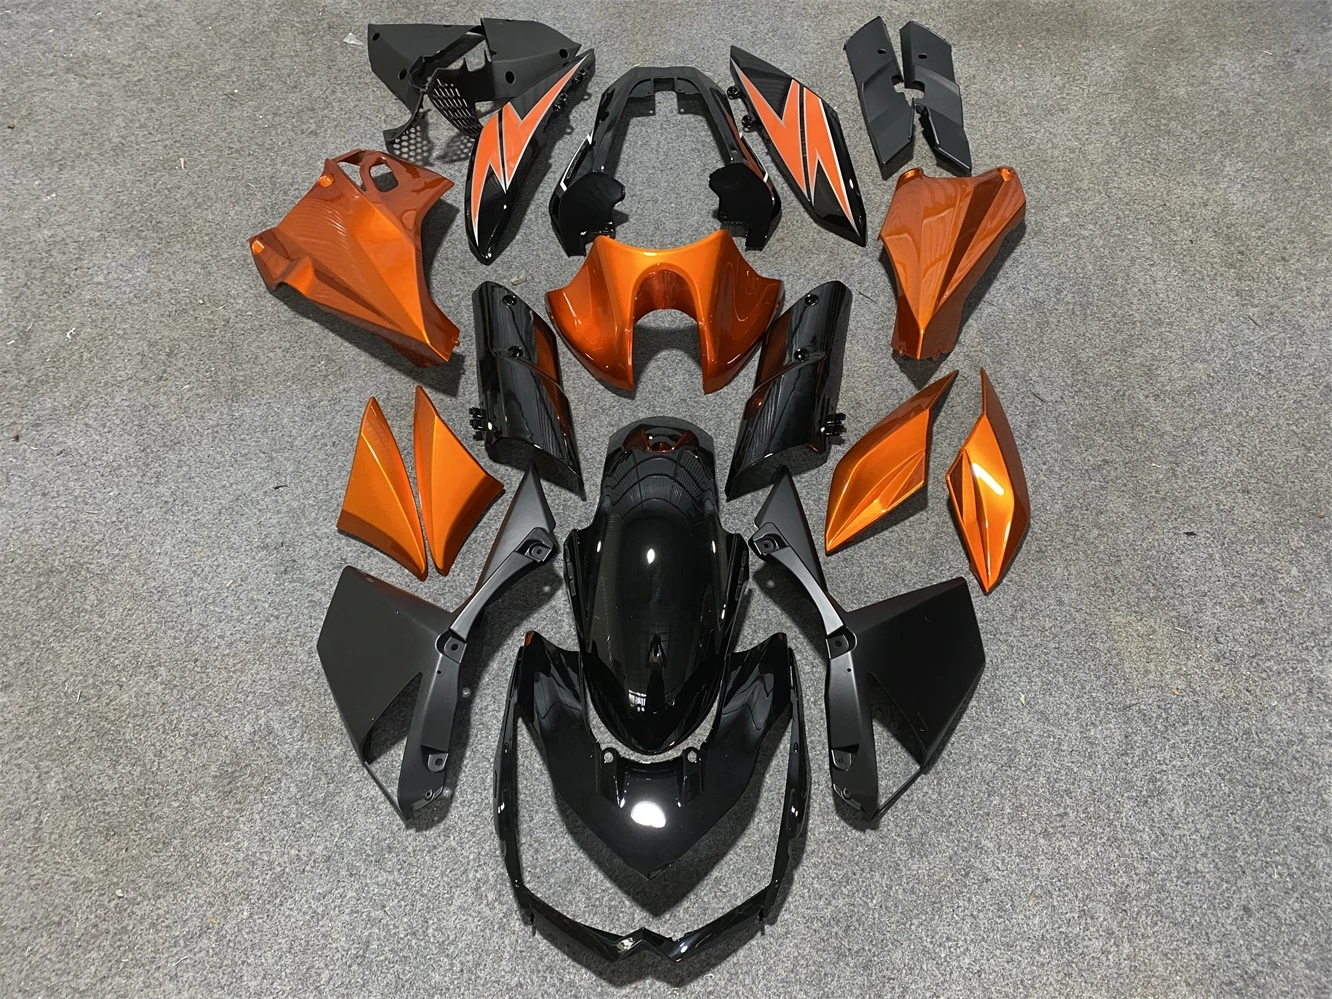 

Full Vehicle Fairing Body Kit Appearance Fairing Guard Cover for Z1000 Z 1000 2010 2011 2012 2013 10 11 12 13 Motorcycle Parts